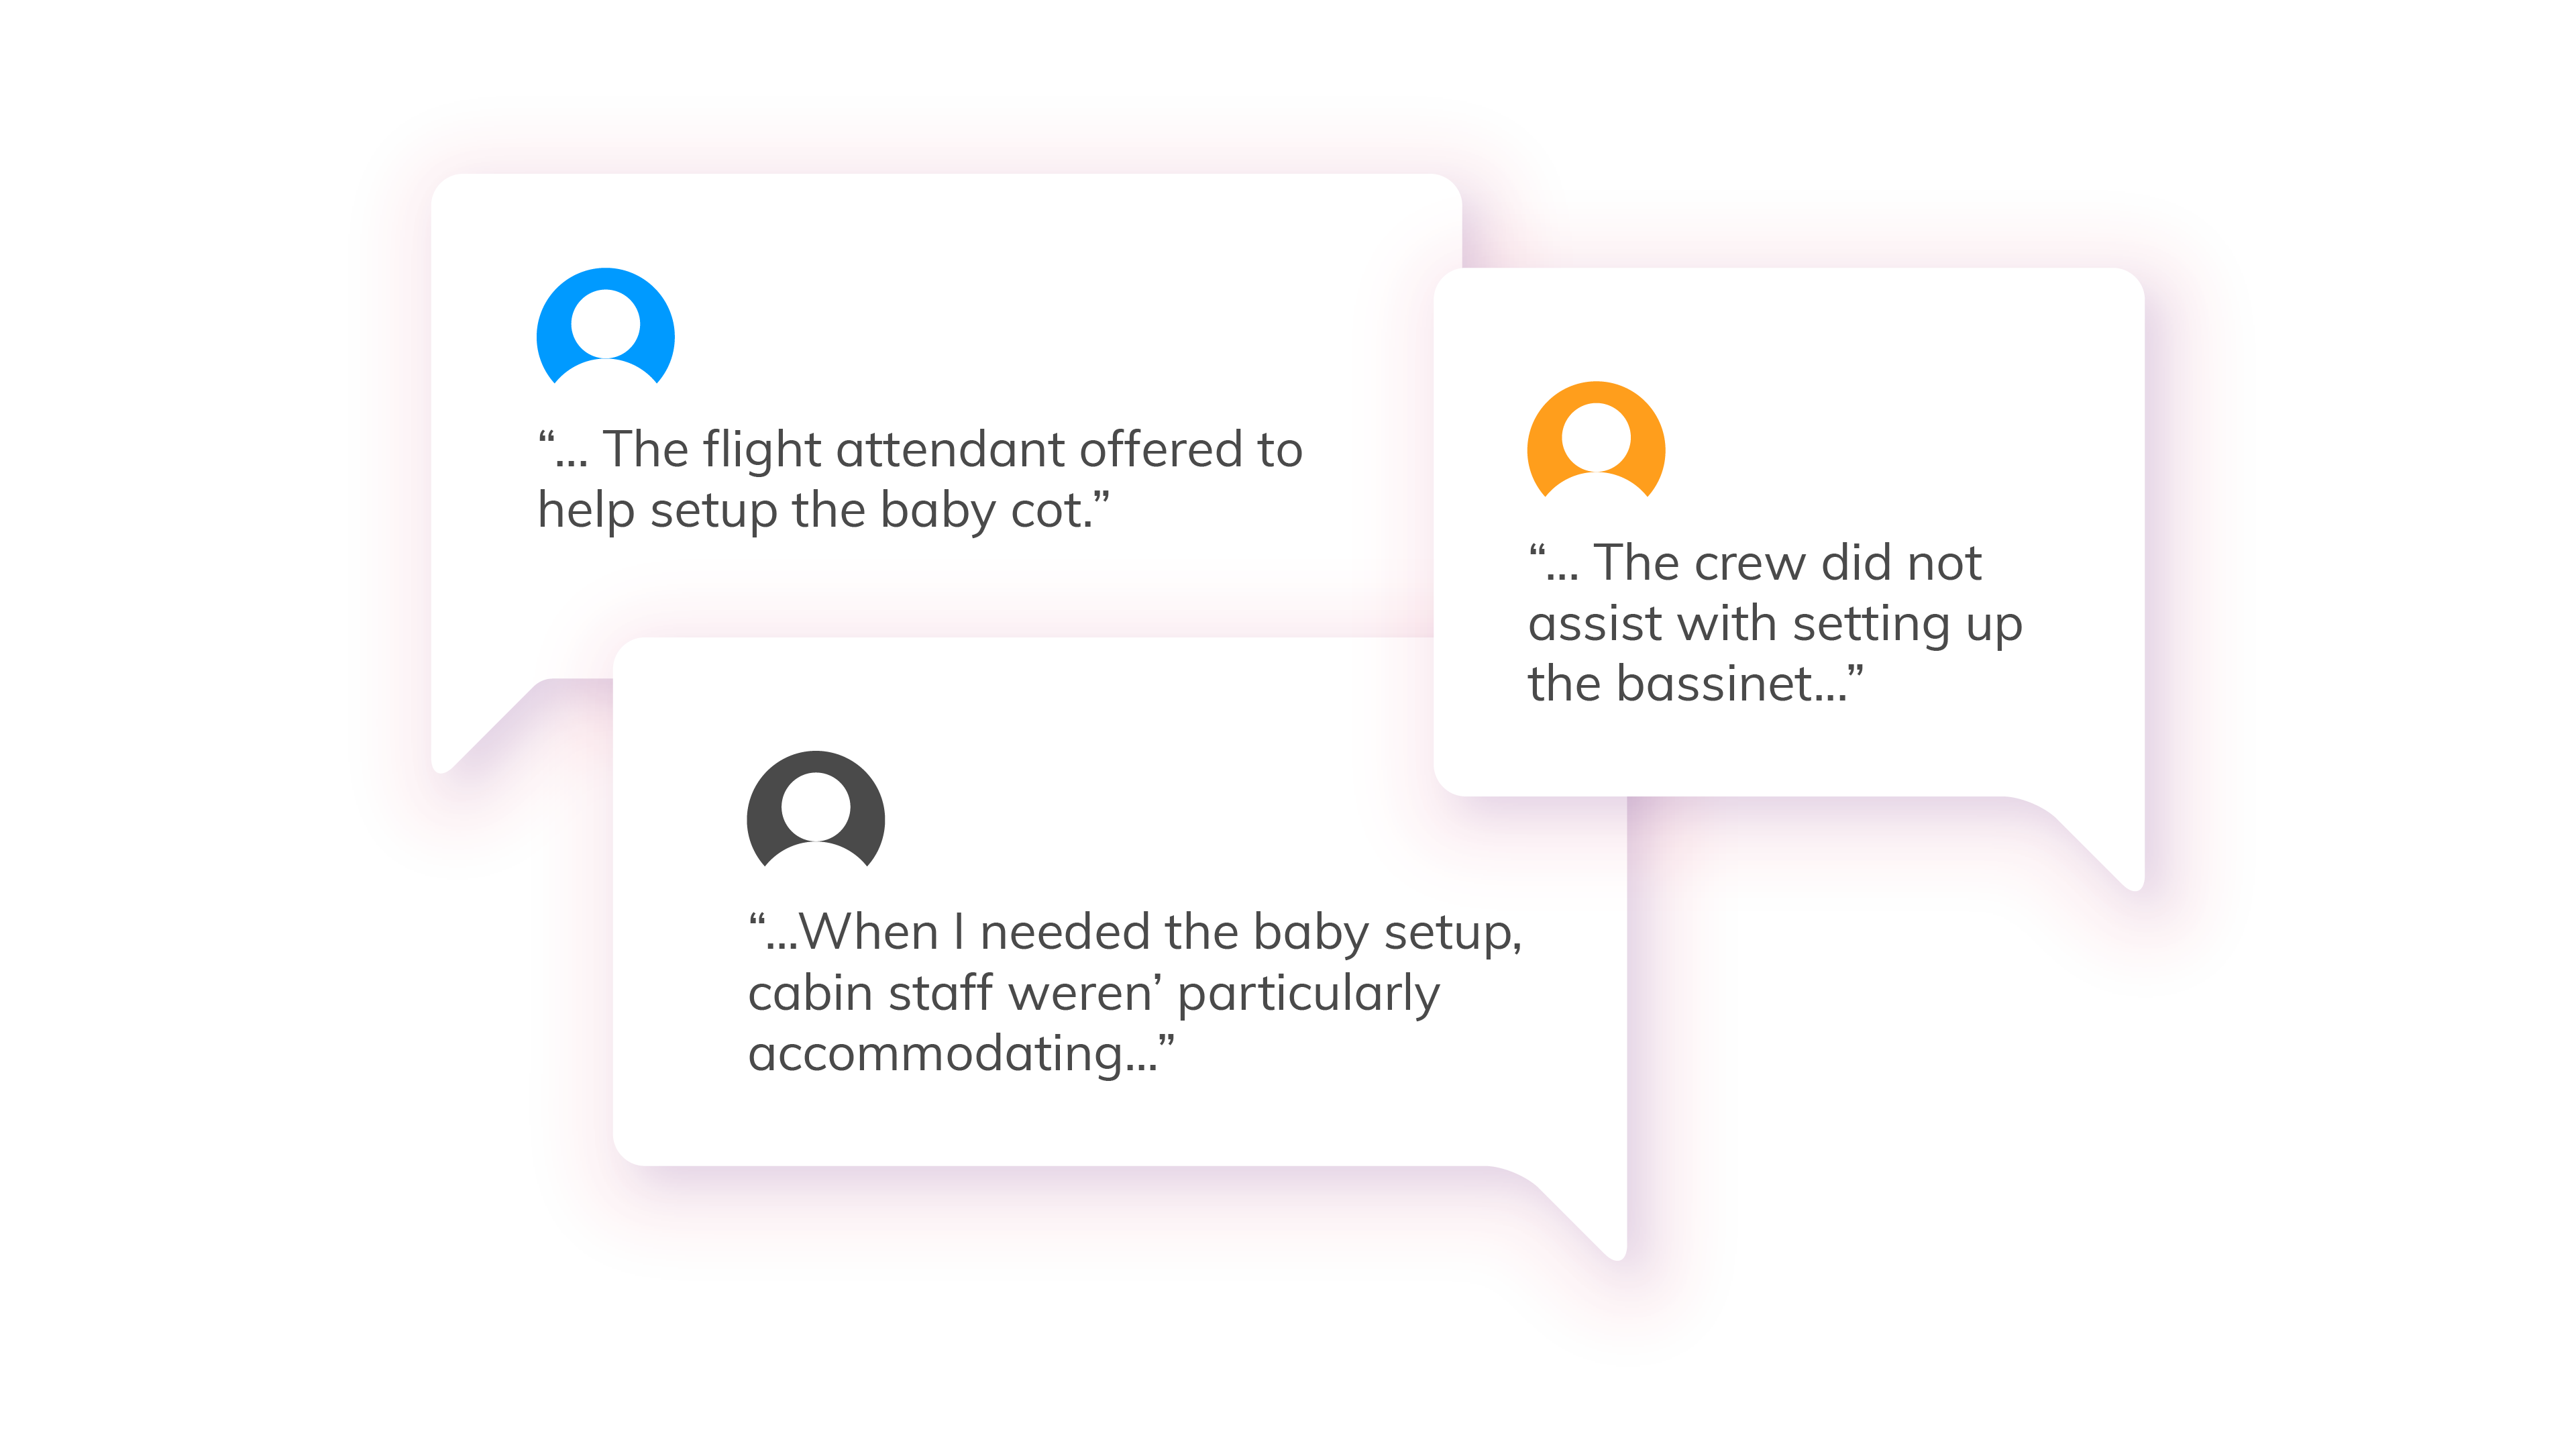 Three people with speech bubbles, each providing feedback about baby cot services on a plane.